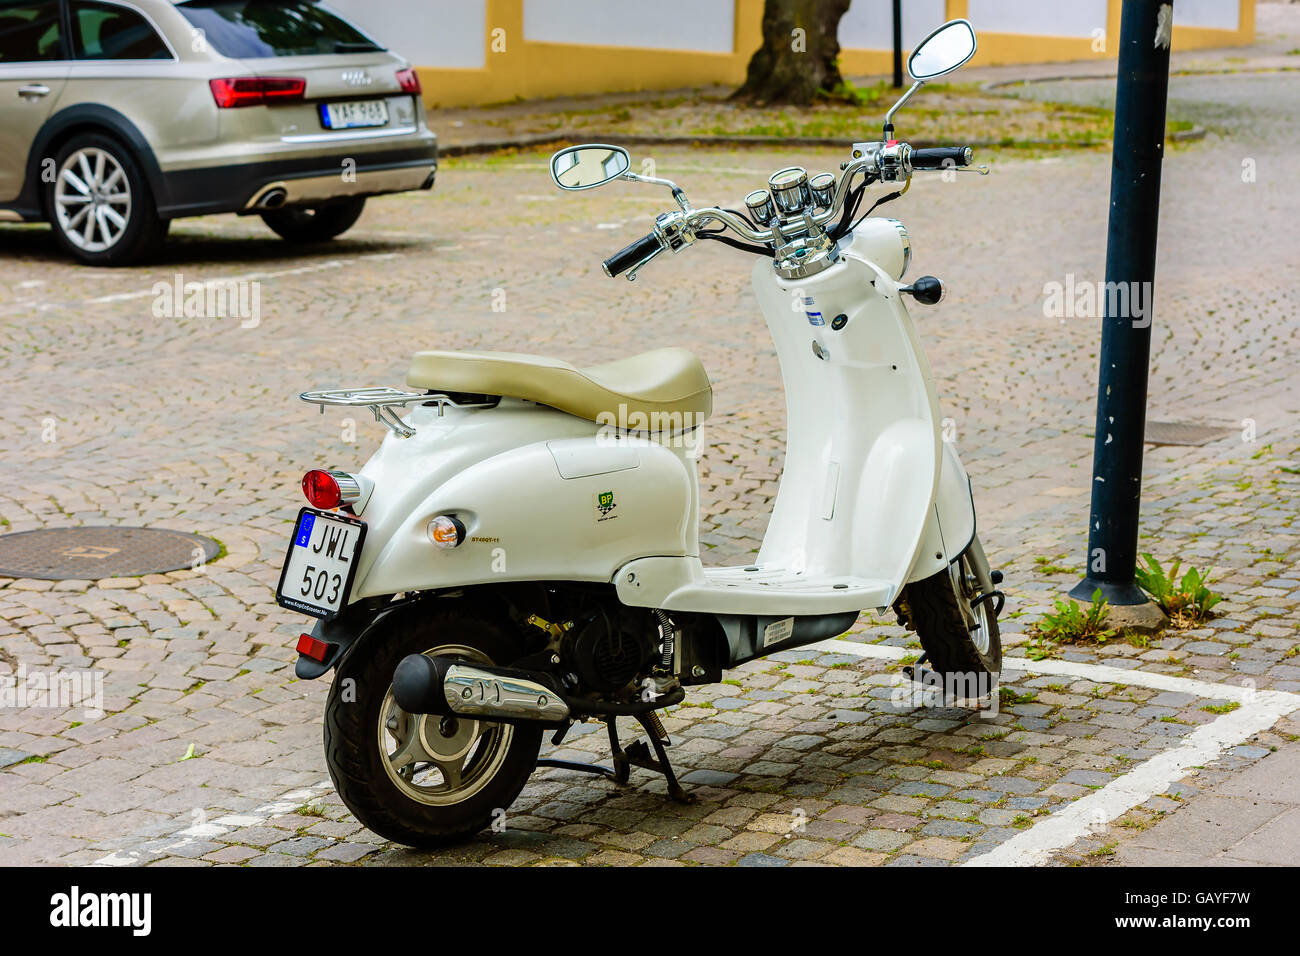 Motala, Sweden - June 21, 2016: Baotian retro 2013 moped parked in the  street Stock Photo - Alamy